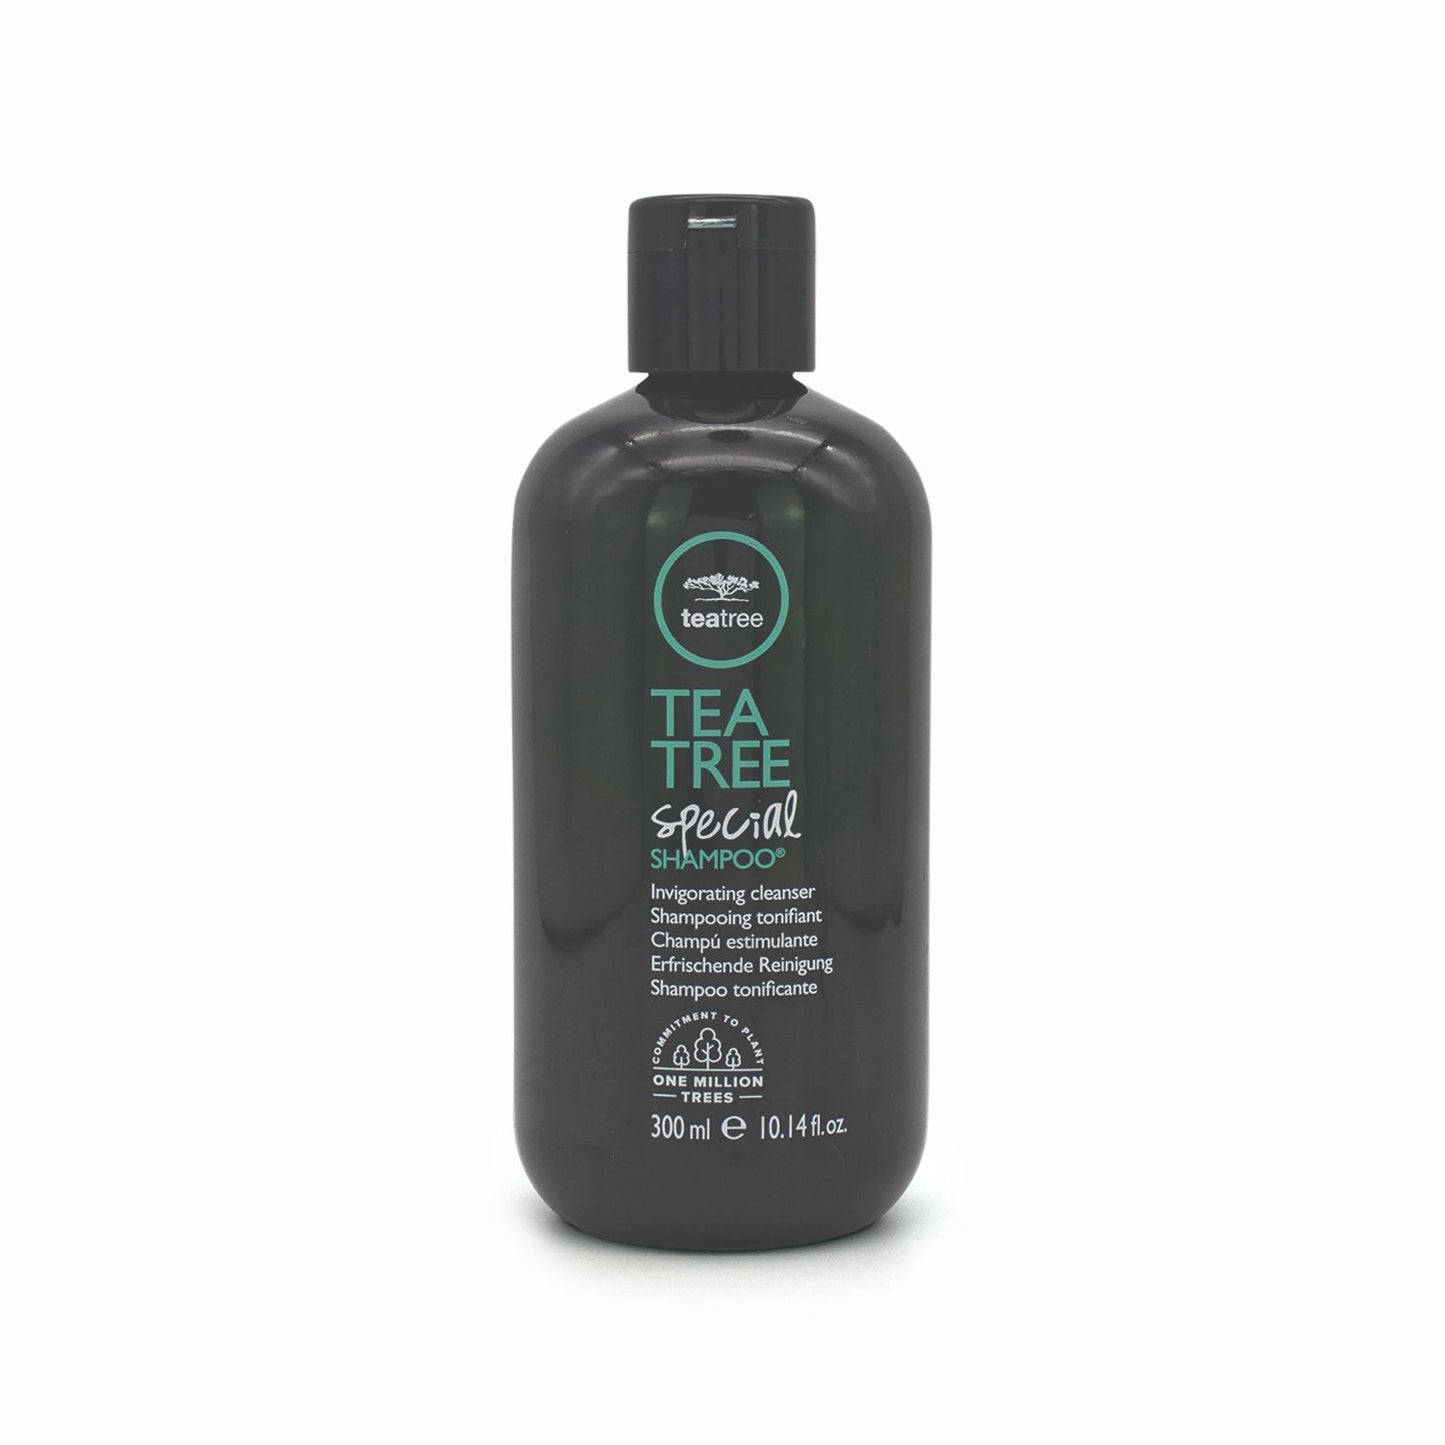 Paul Mitchell Tea Tree Special Shampoo 300ml - Imperfect Container